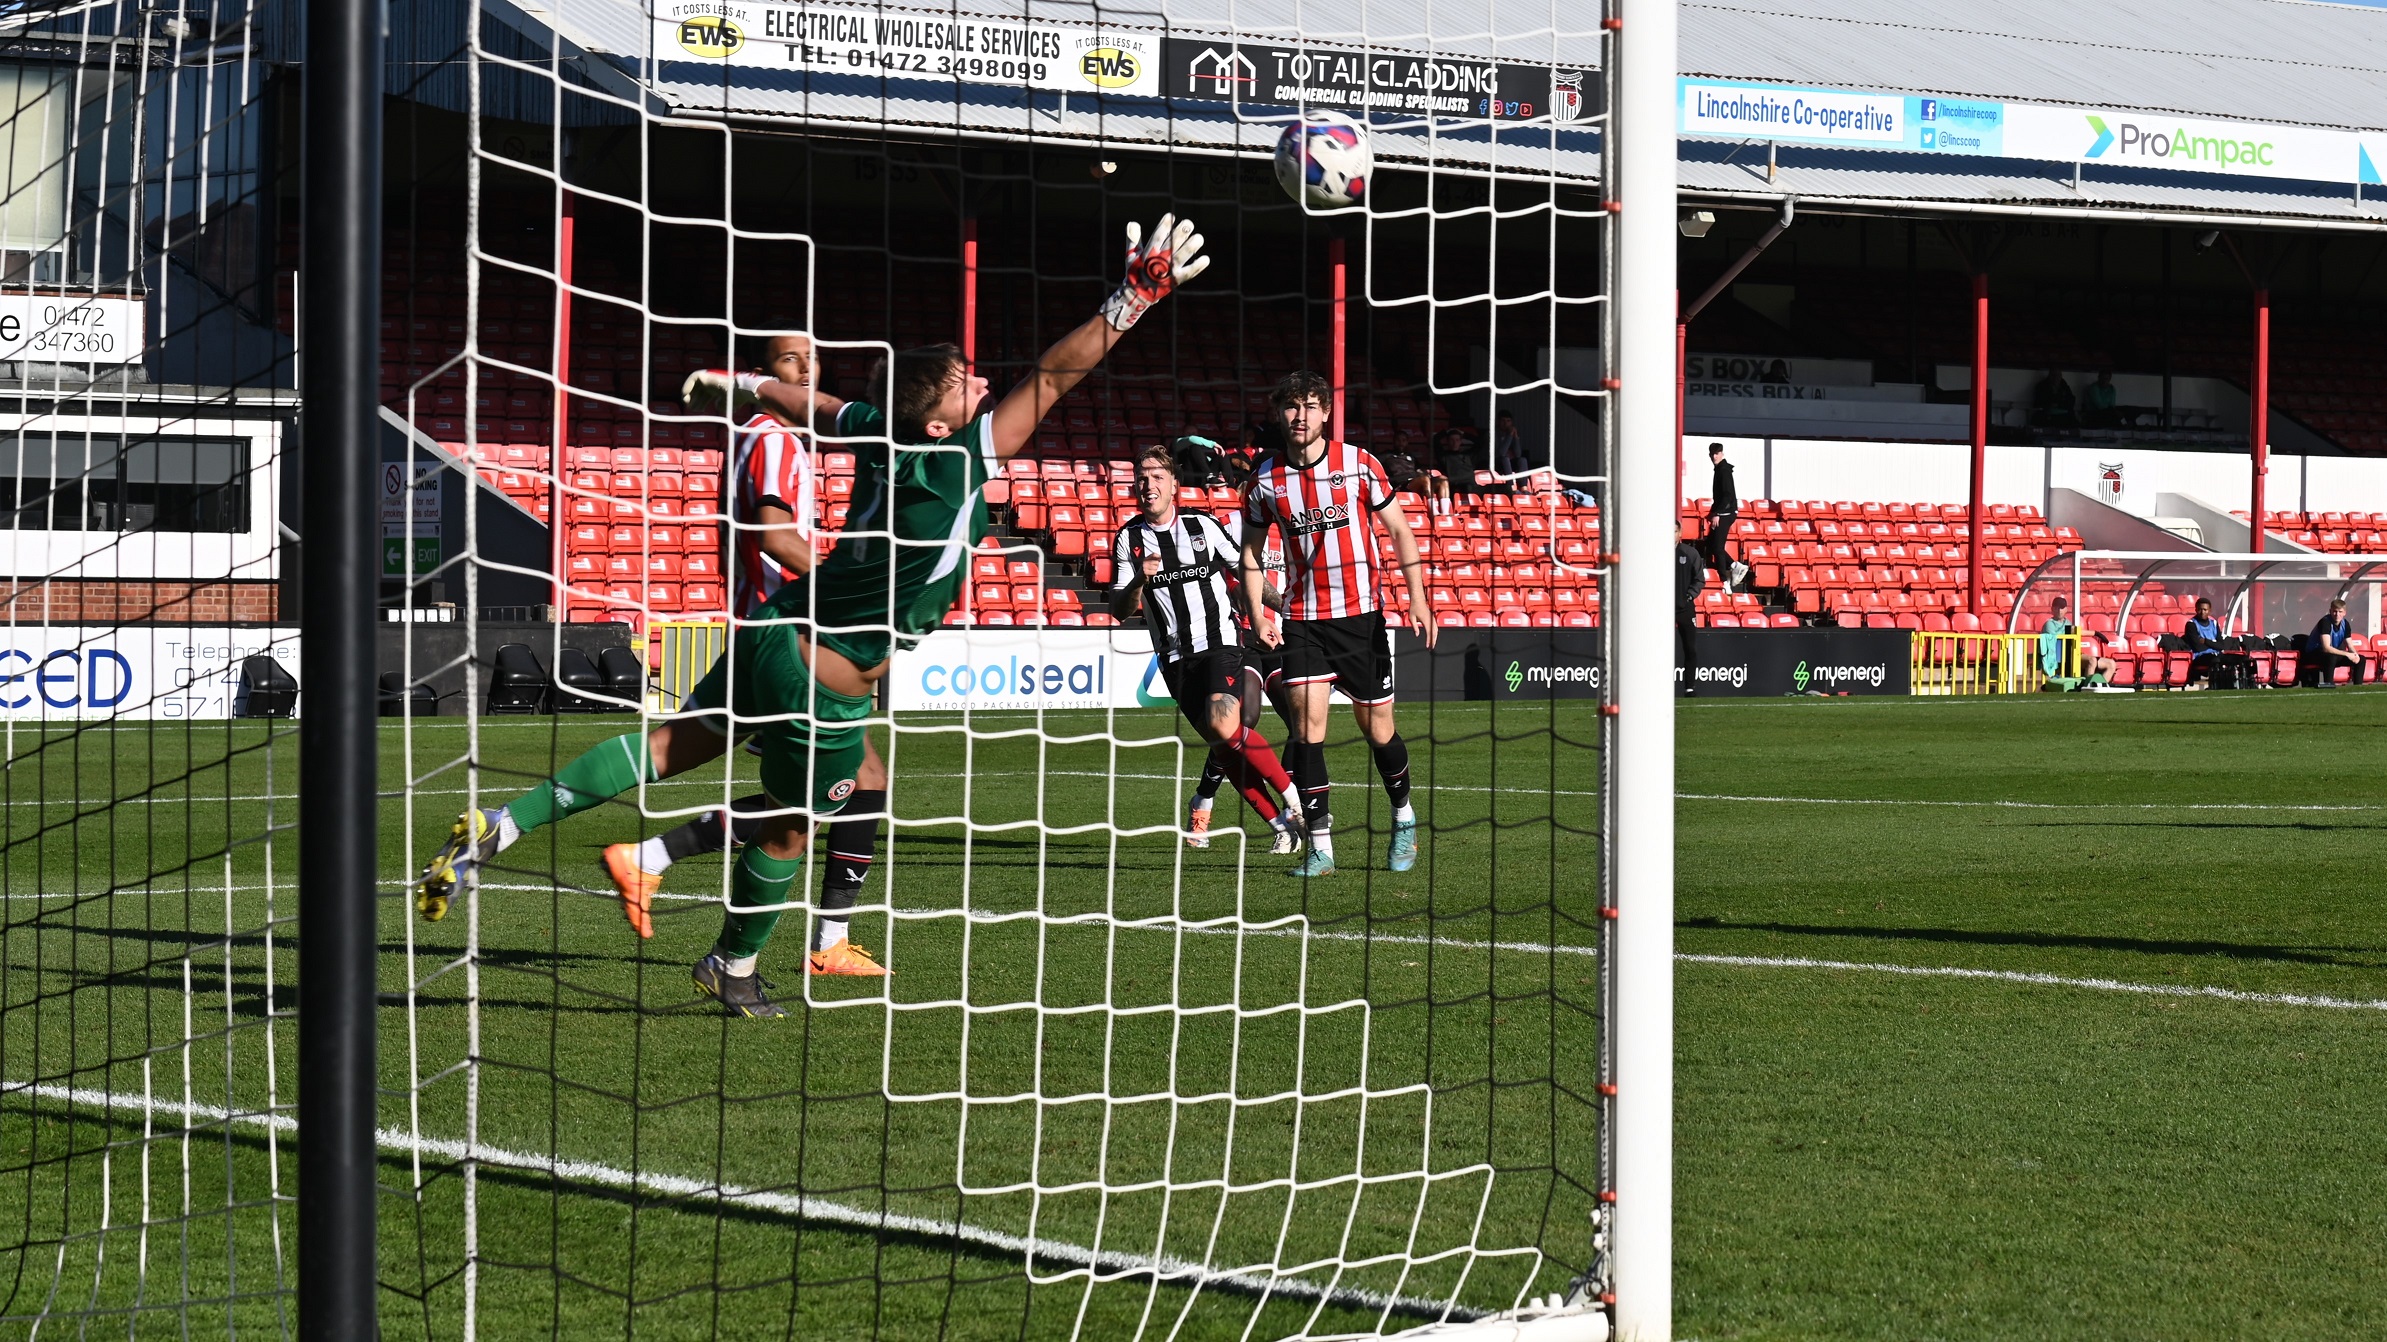 Jordan Maguire-Drew scores in a behind closed doors game against Sheffield United